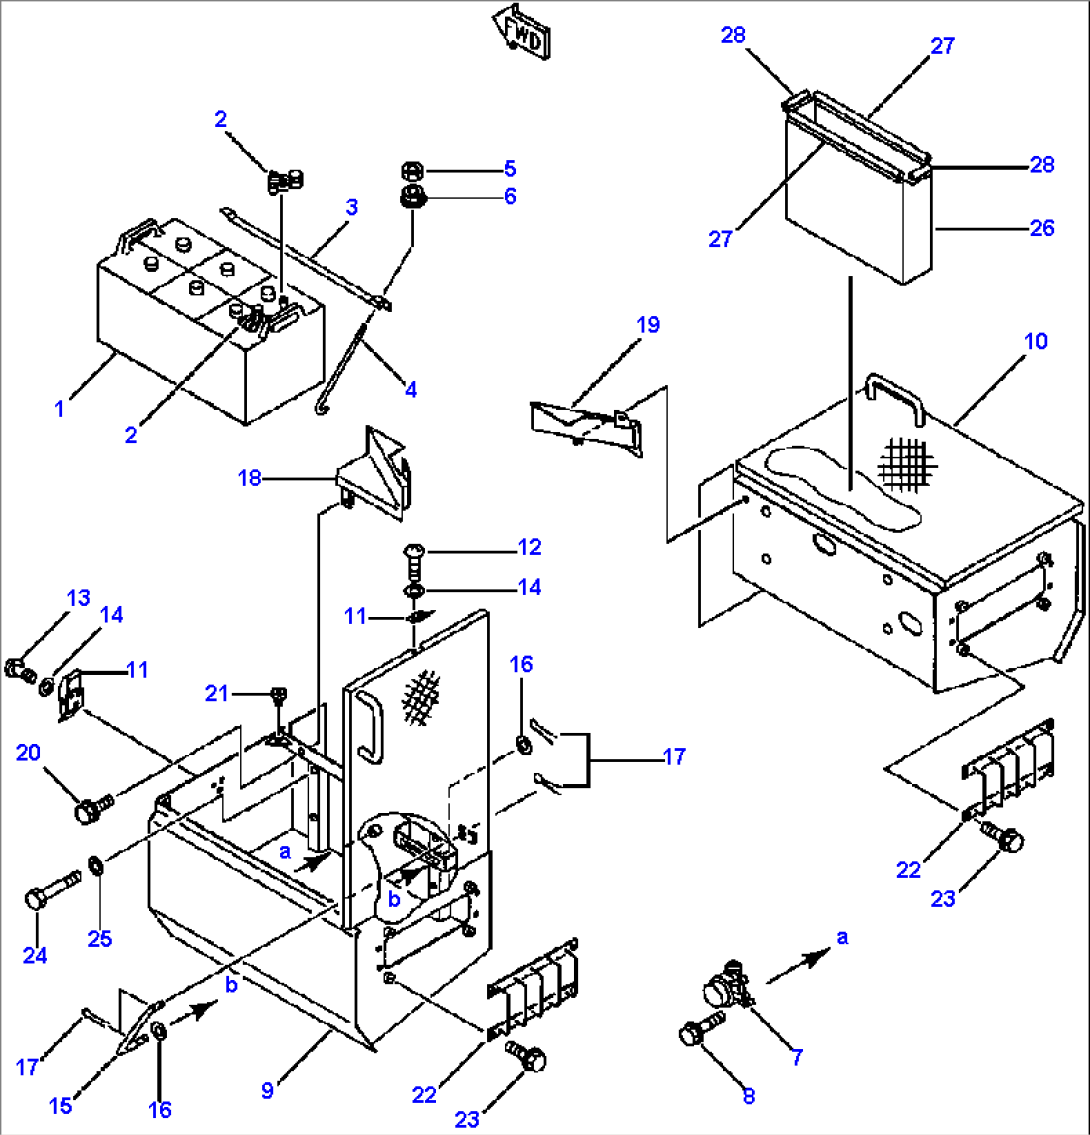 BATTERY AND BATTERY RELAY